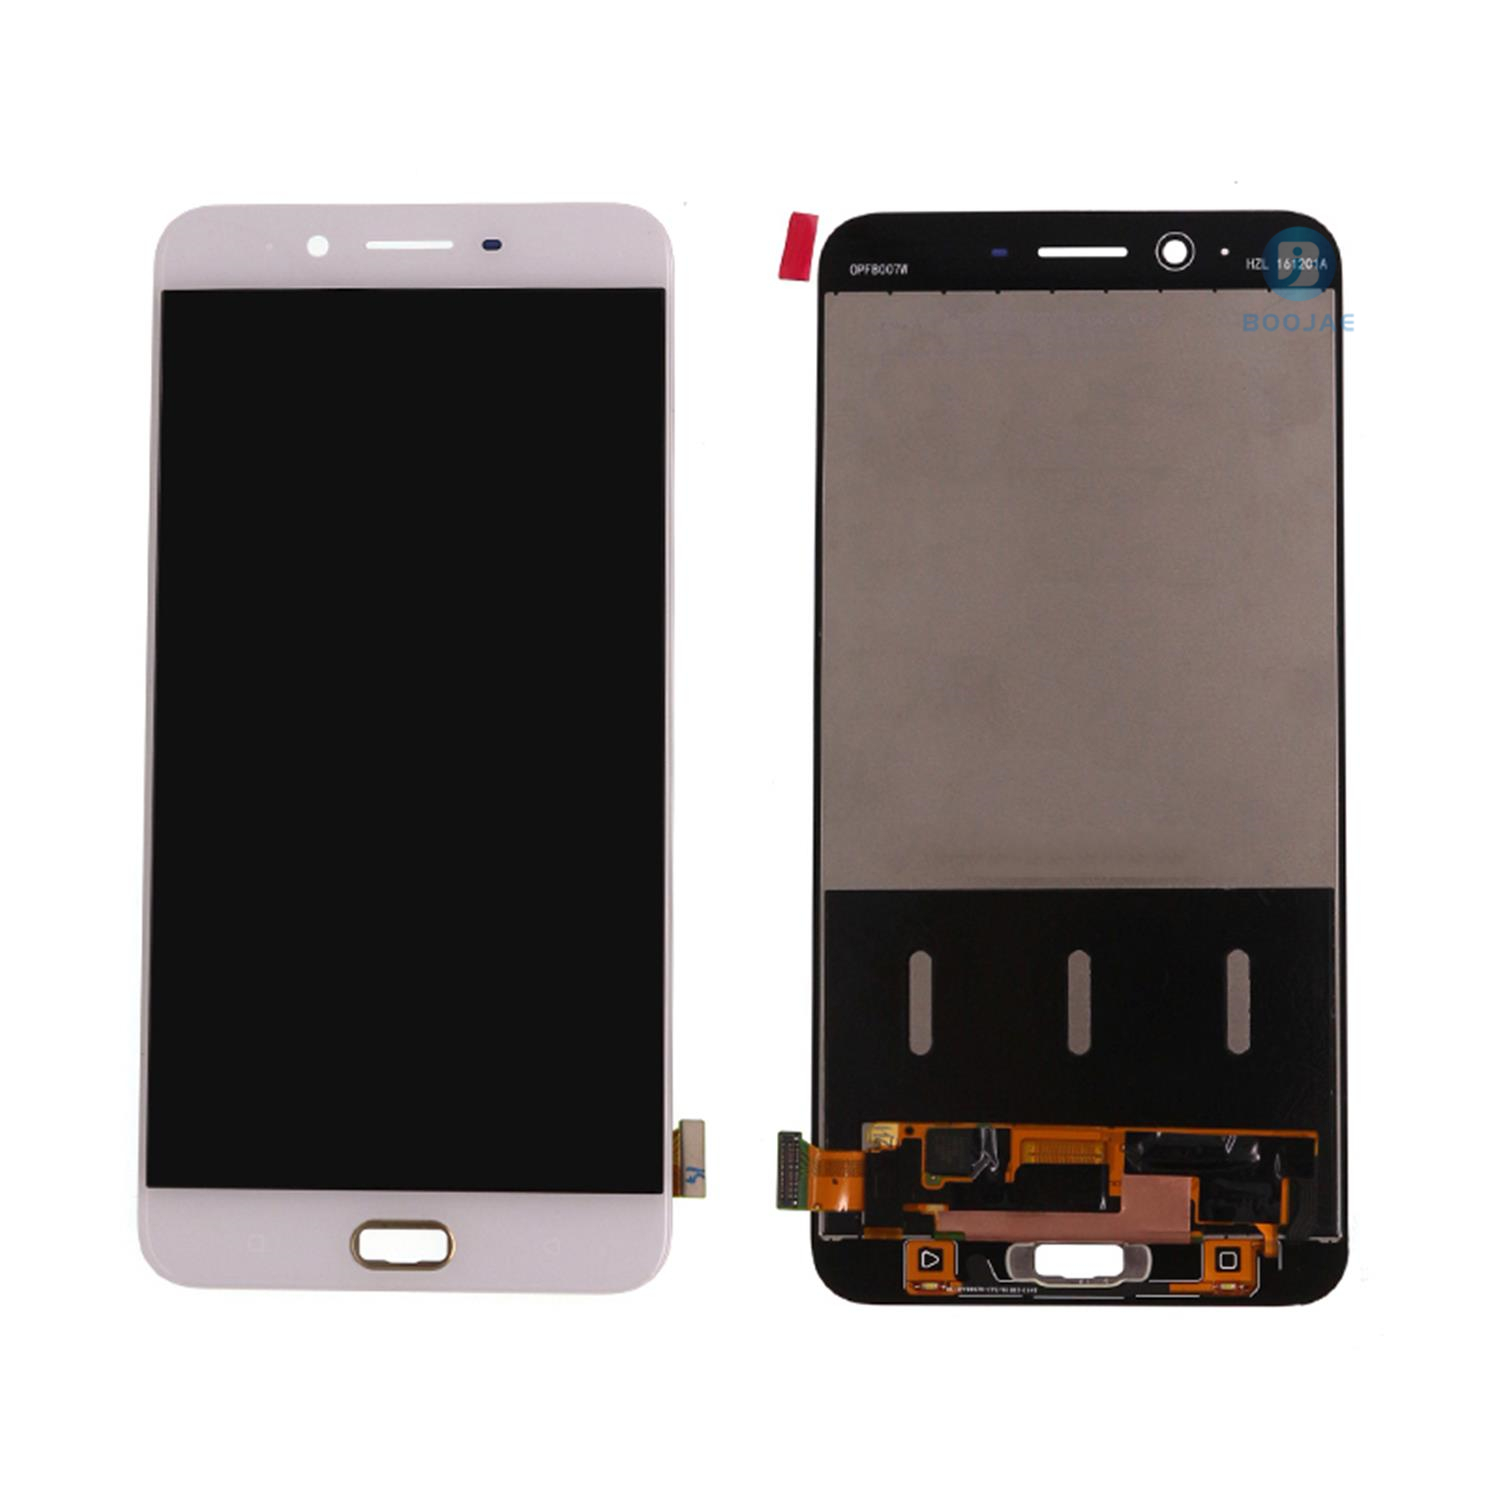 For OPPO R9s Plus LCD Screen Display and Touch Panel Digitizer Assembly Replacement